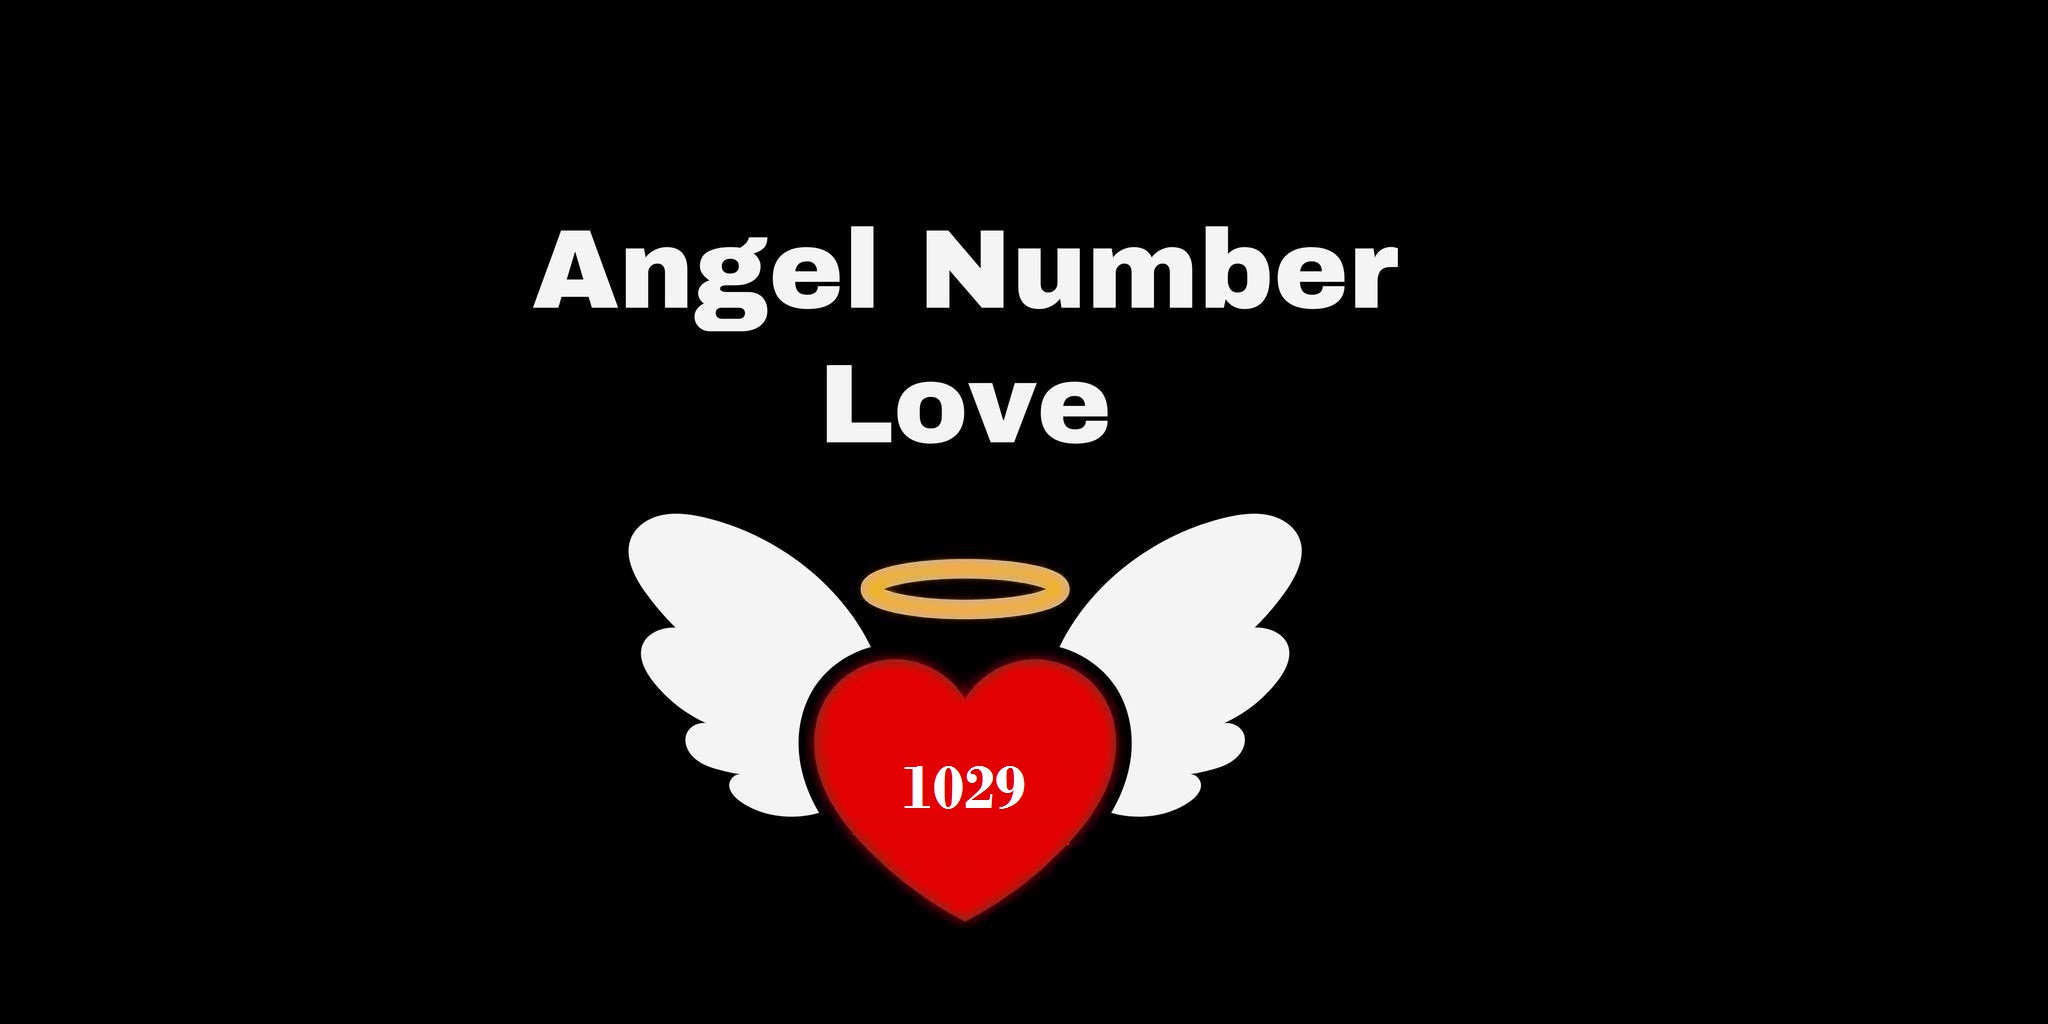 1029 Angel Number Meaning In Love